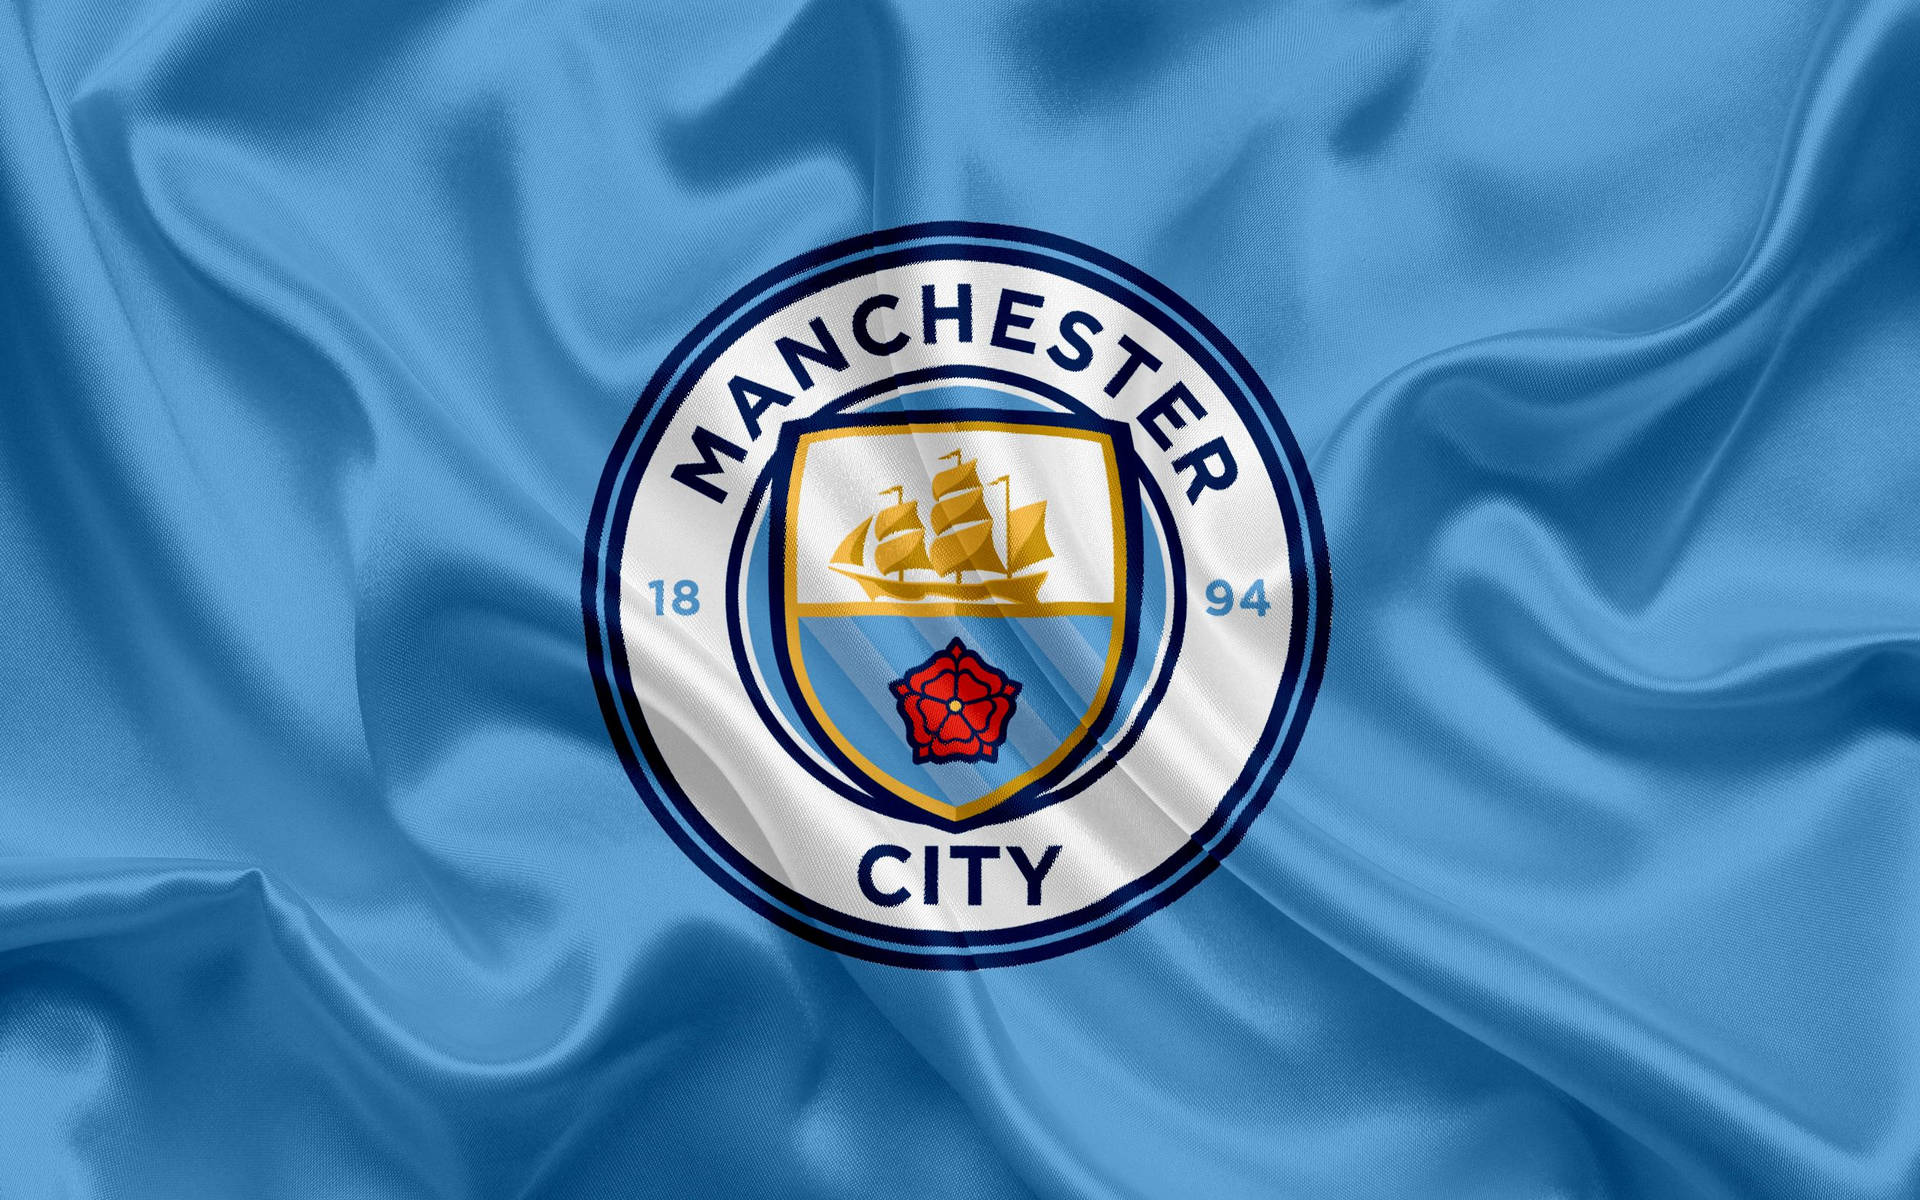 Manchester City's Official Logo and Flag Wallpaper